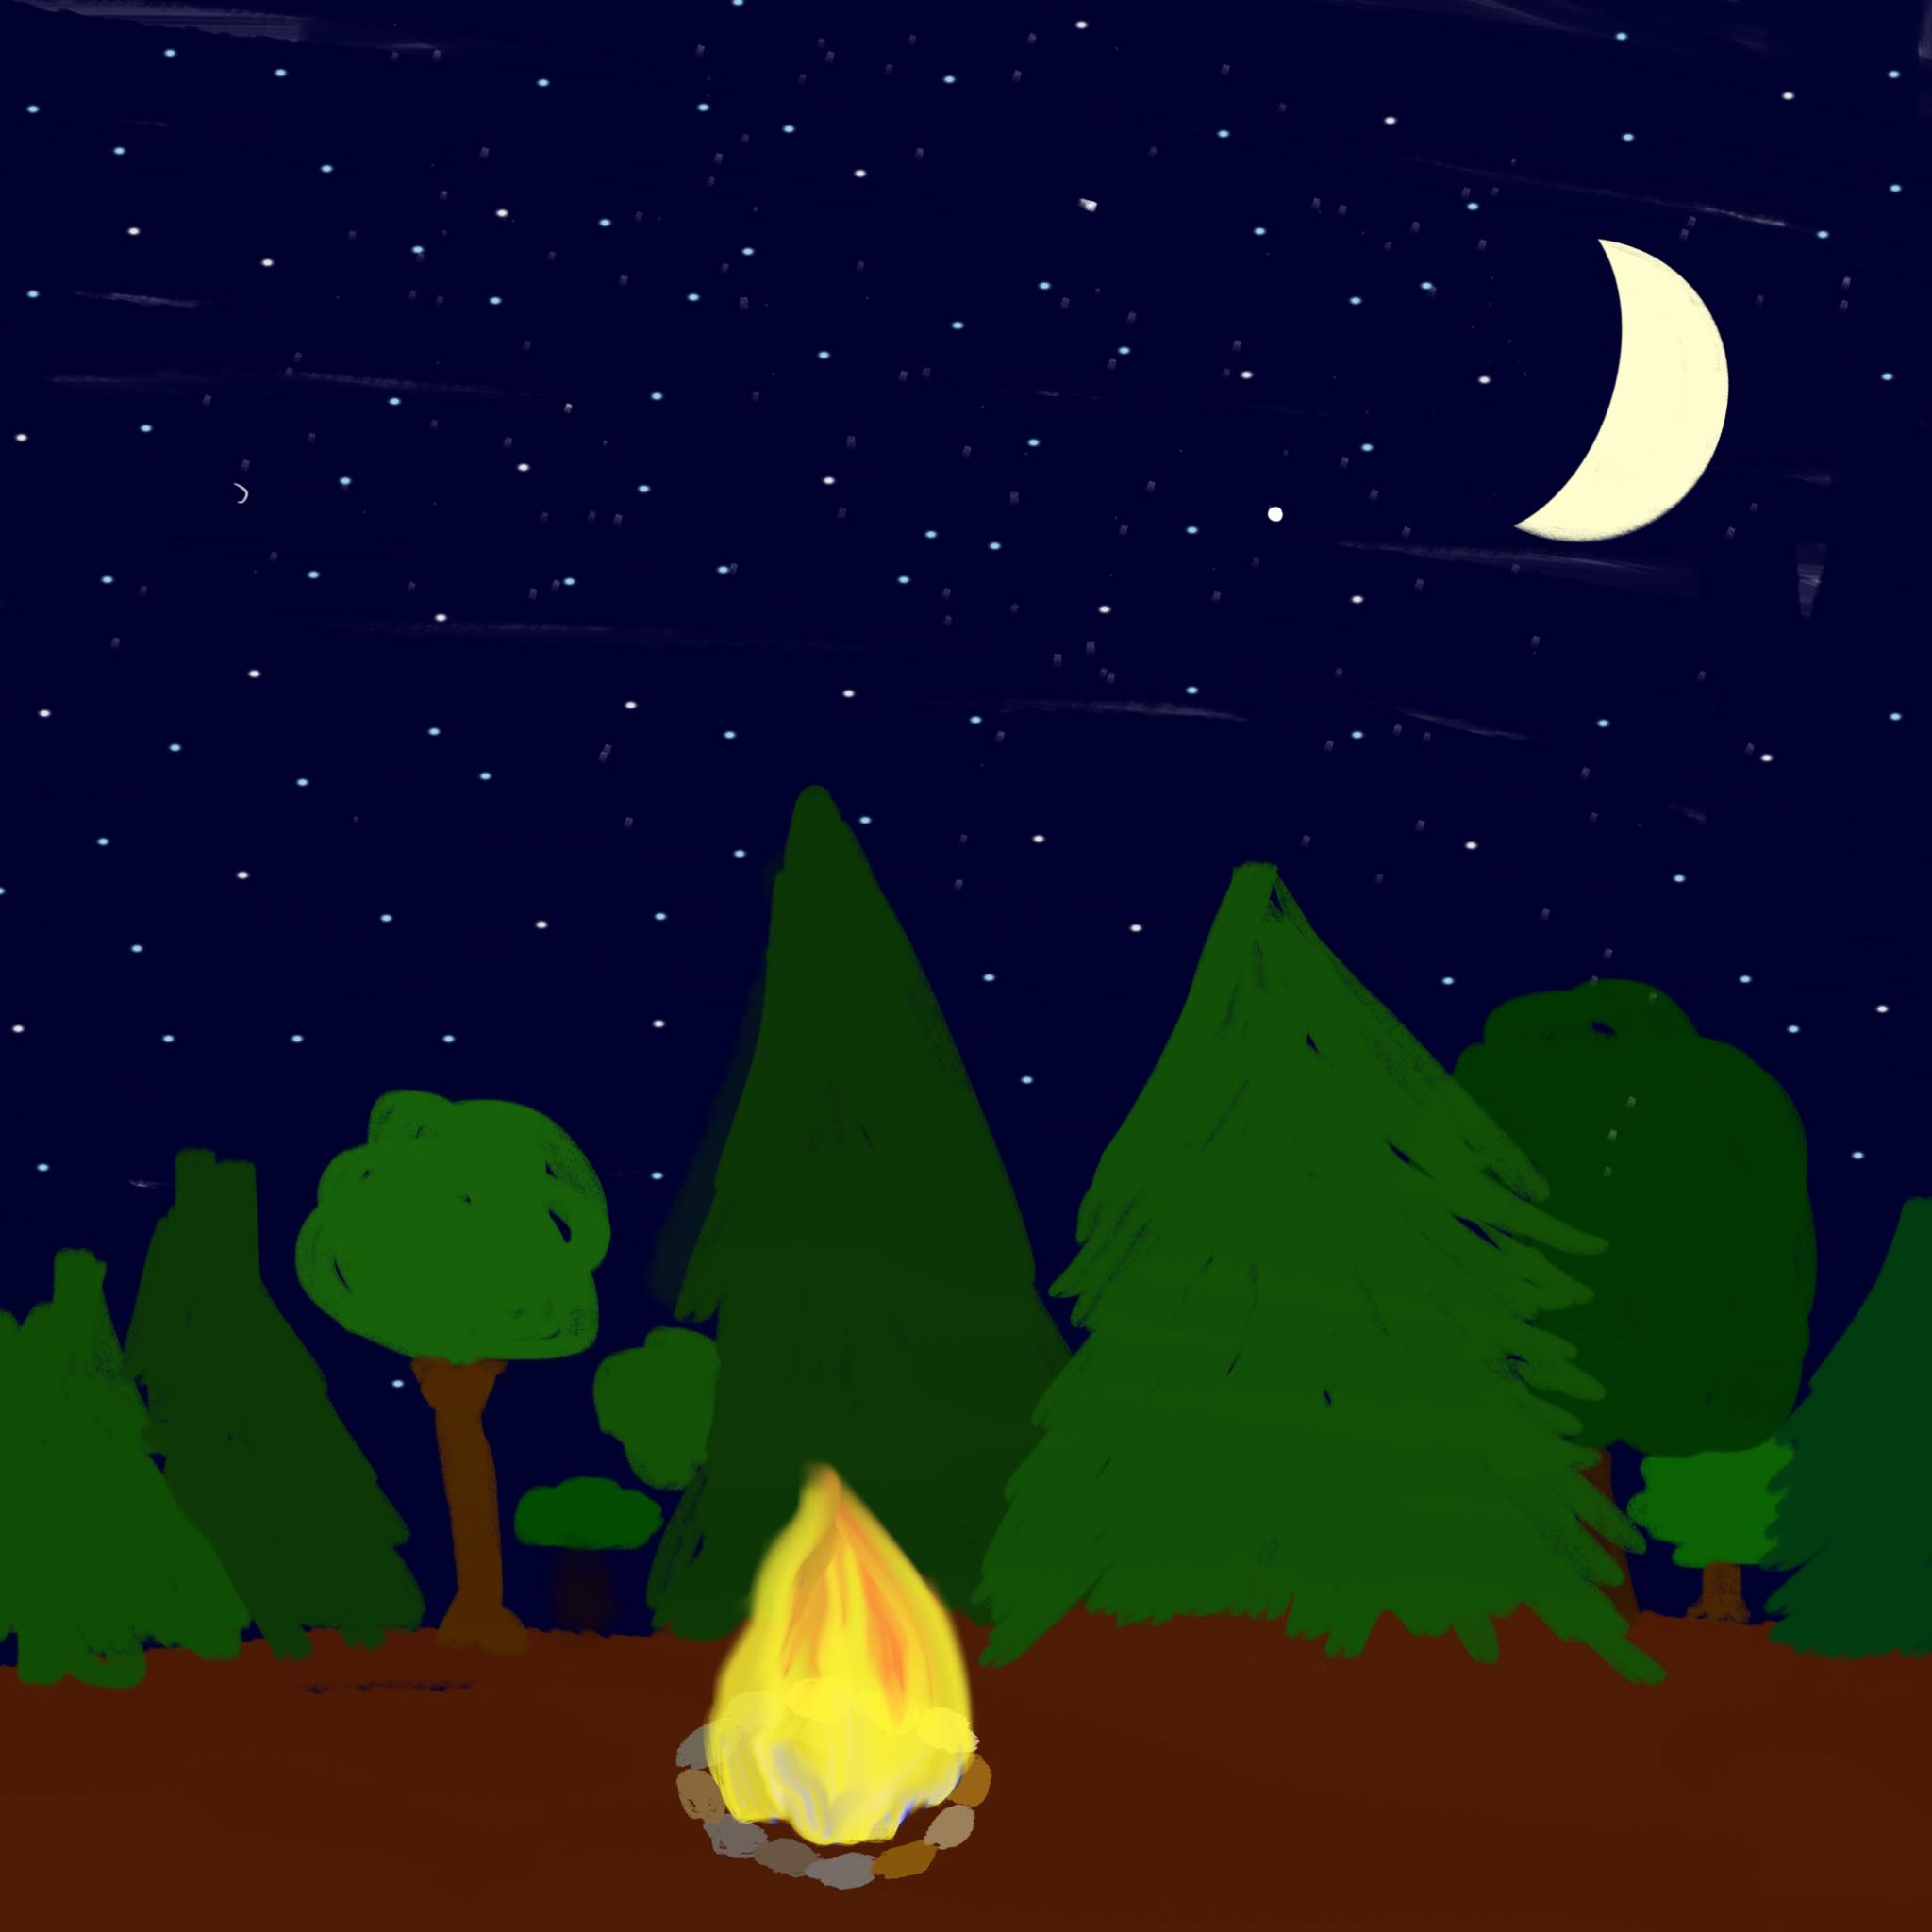 midnight bonfire under a screscent moon with pine trees